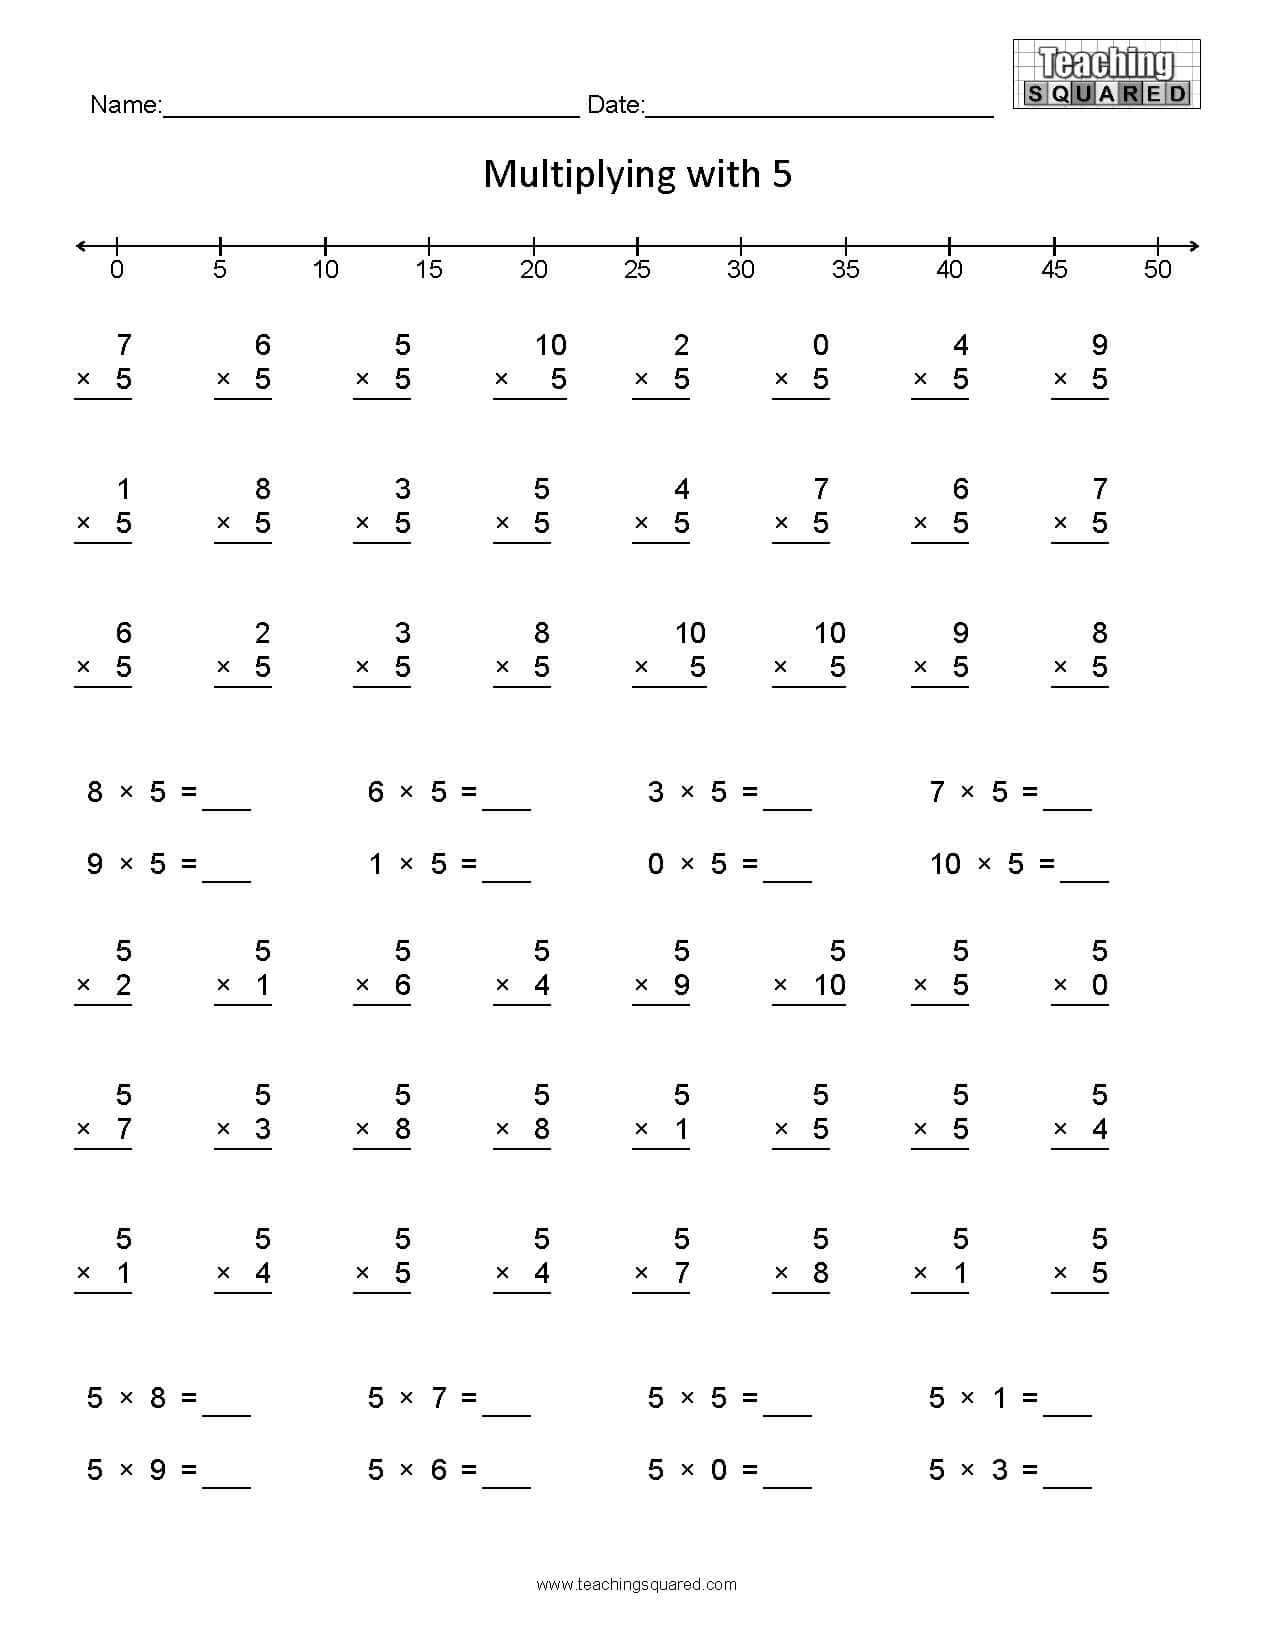 Multiplying with 5 multiplication worksheets